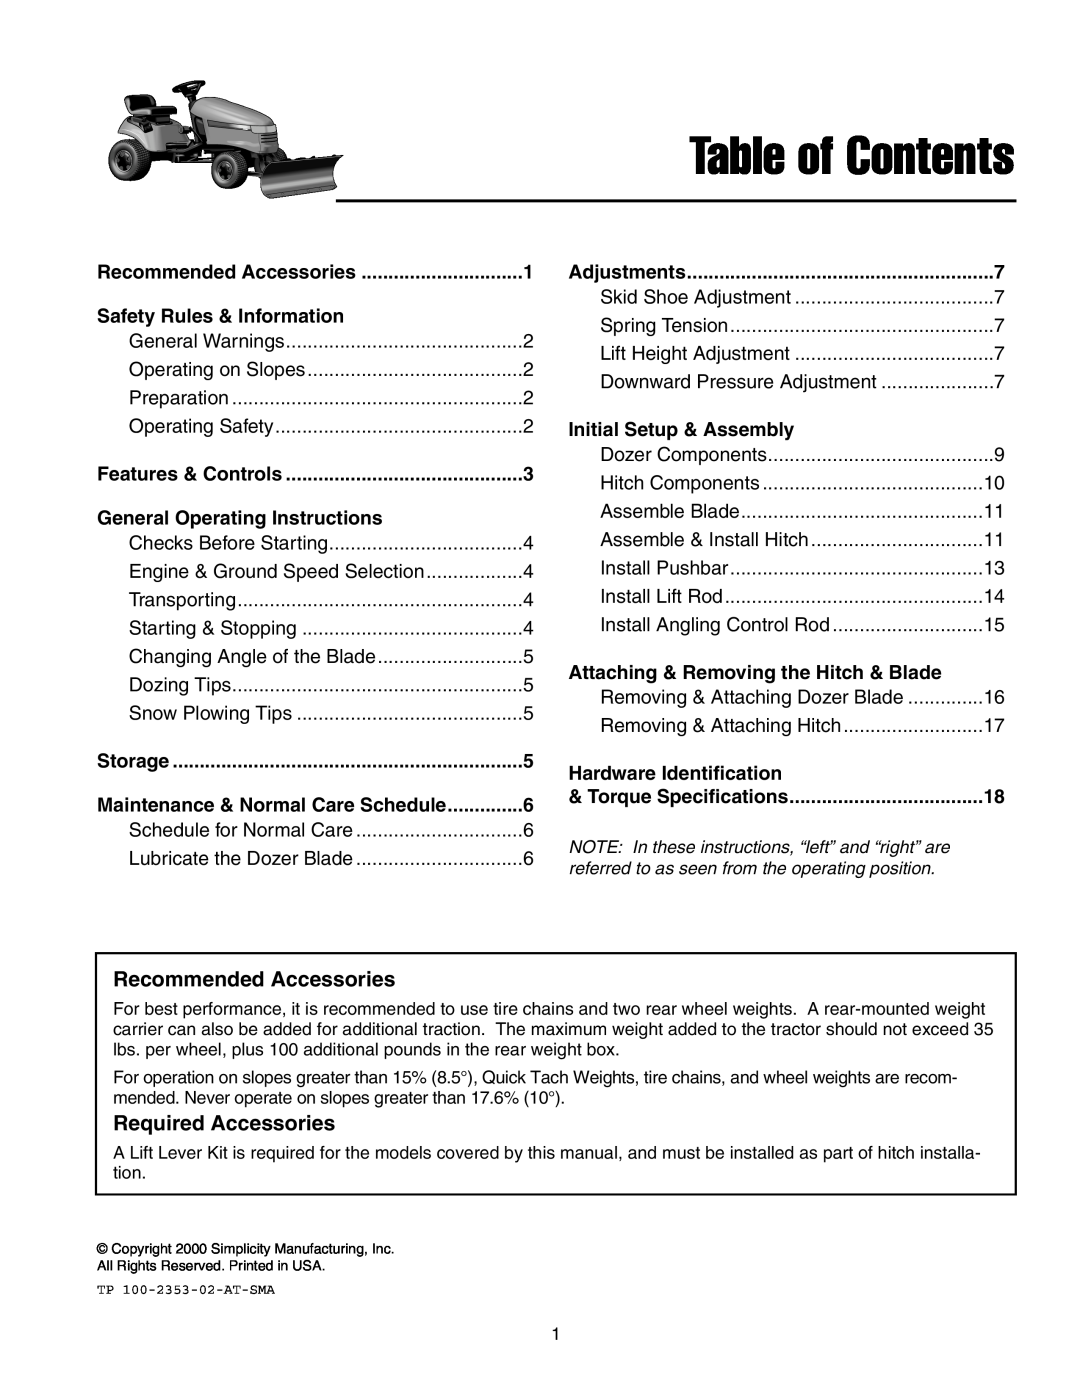 Snapper 1721301-02 Recommended Accessories, Required Accessories, Safety Rules & Information, Storage, Table of Contents 